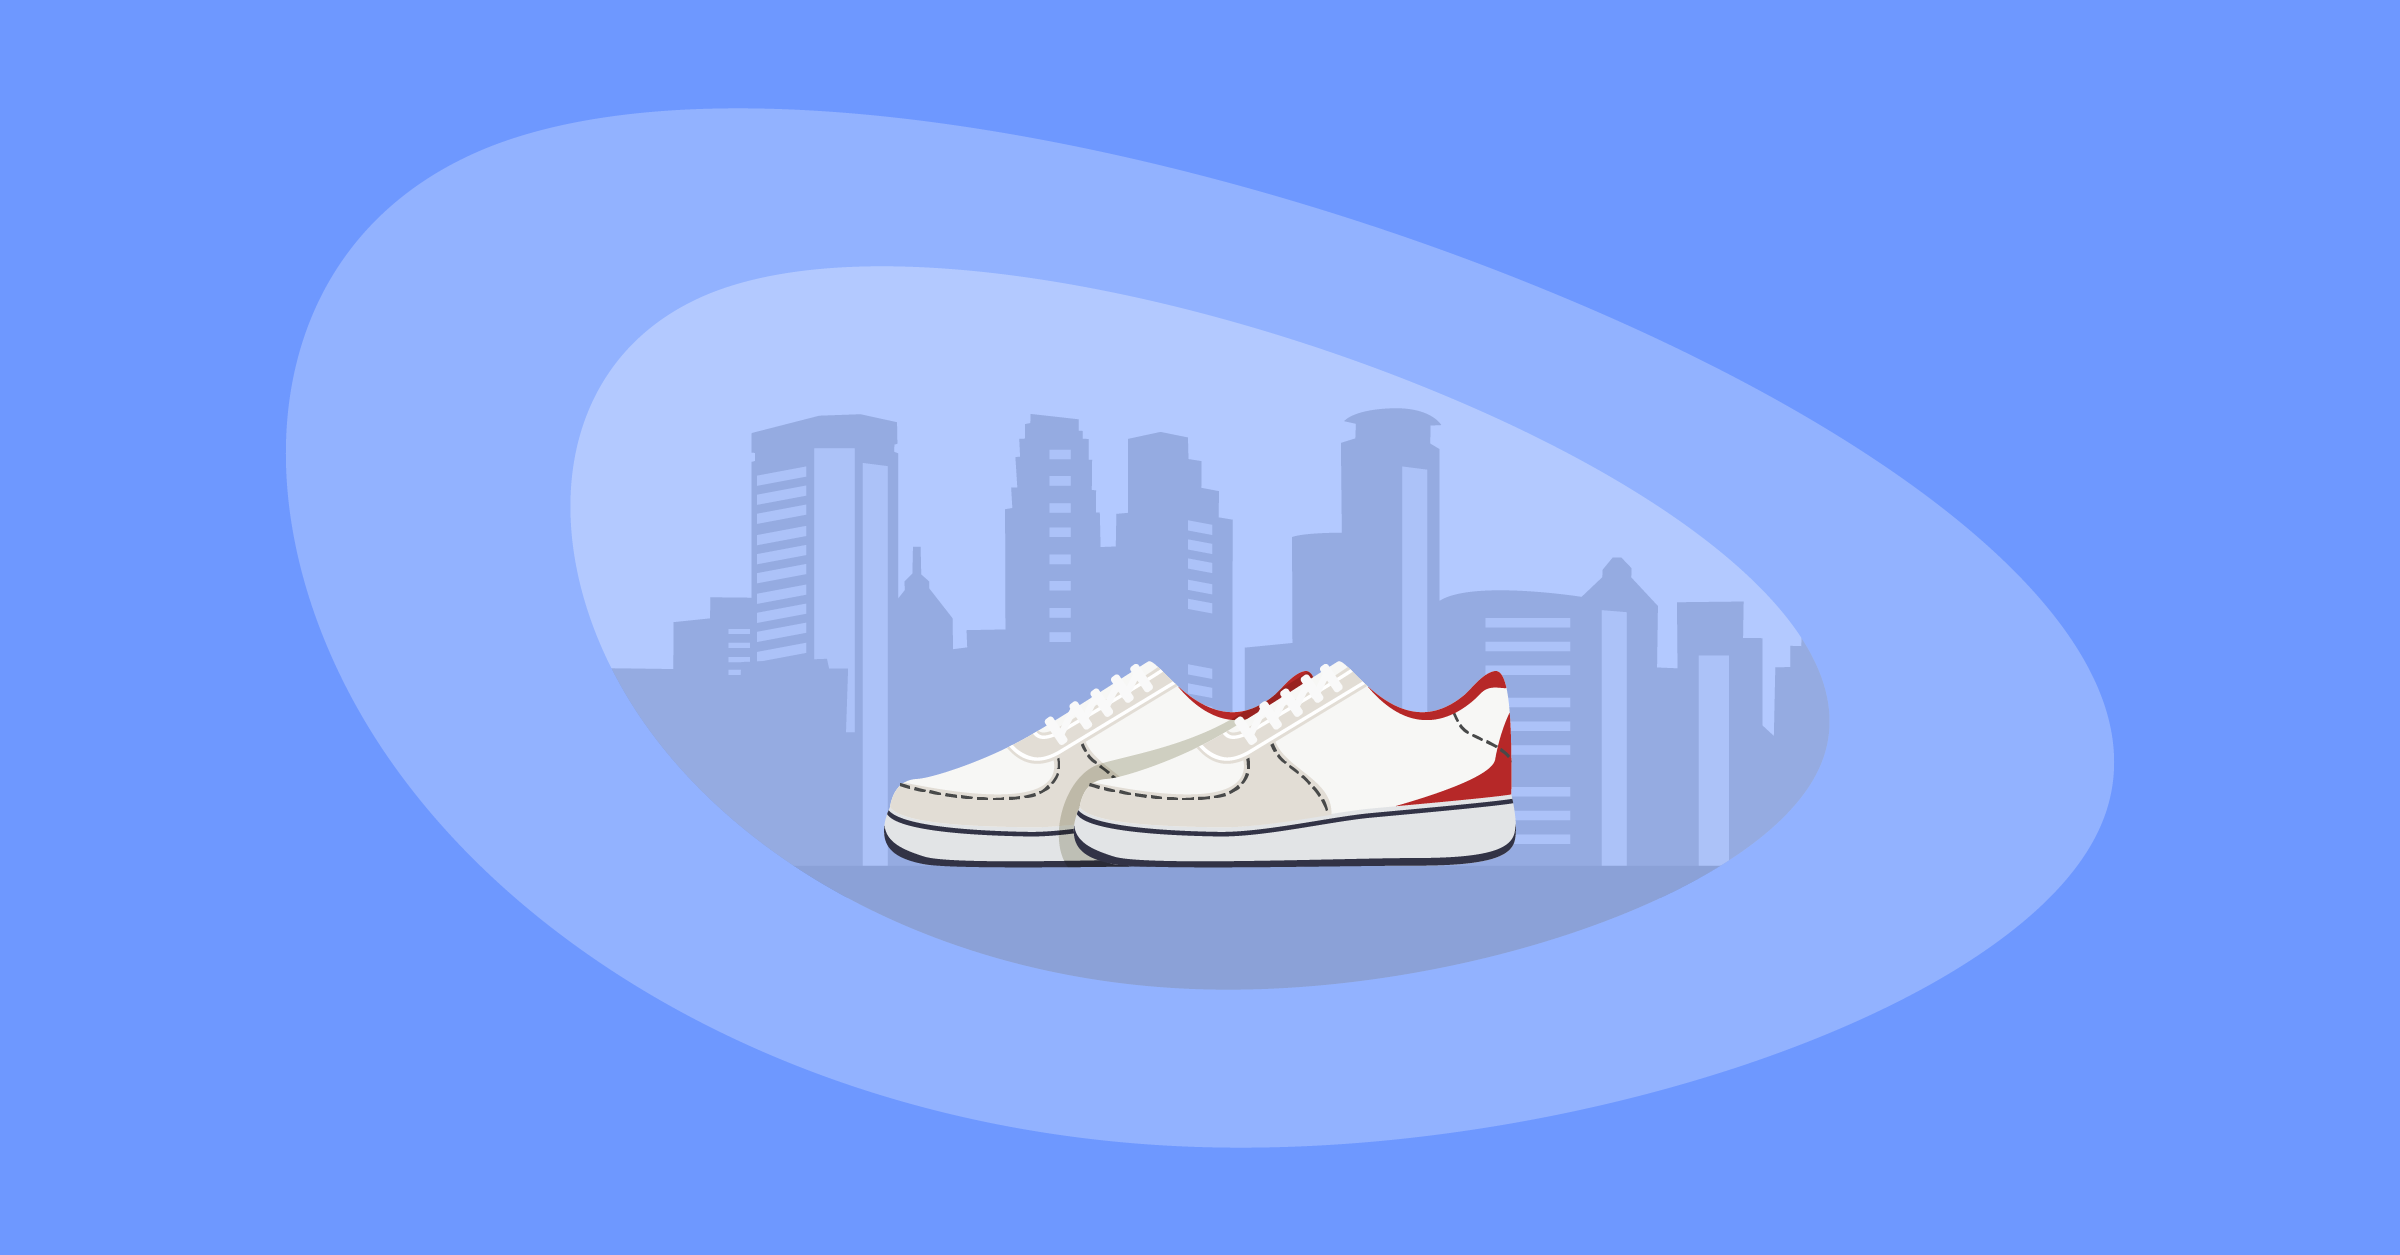 Illustration of a pair of training shoes